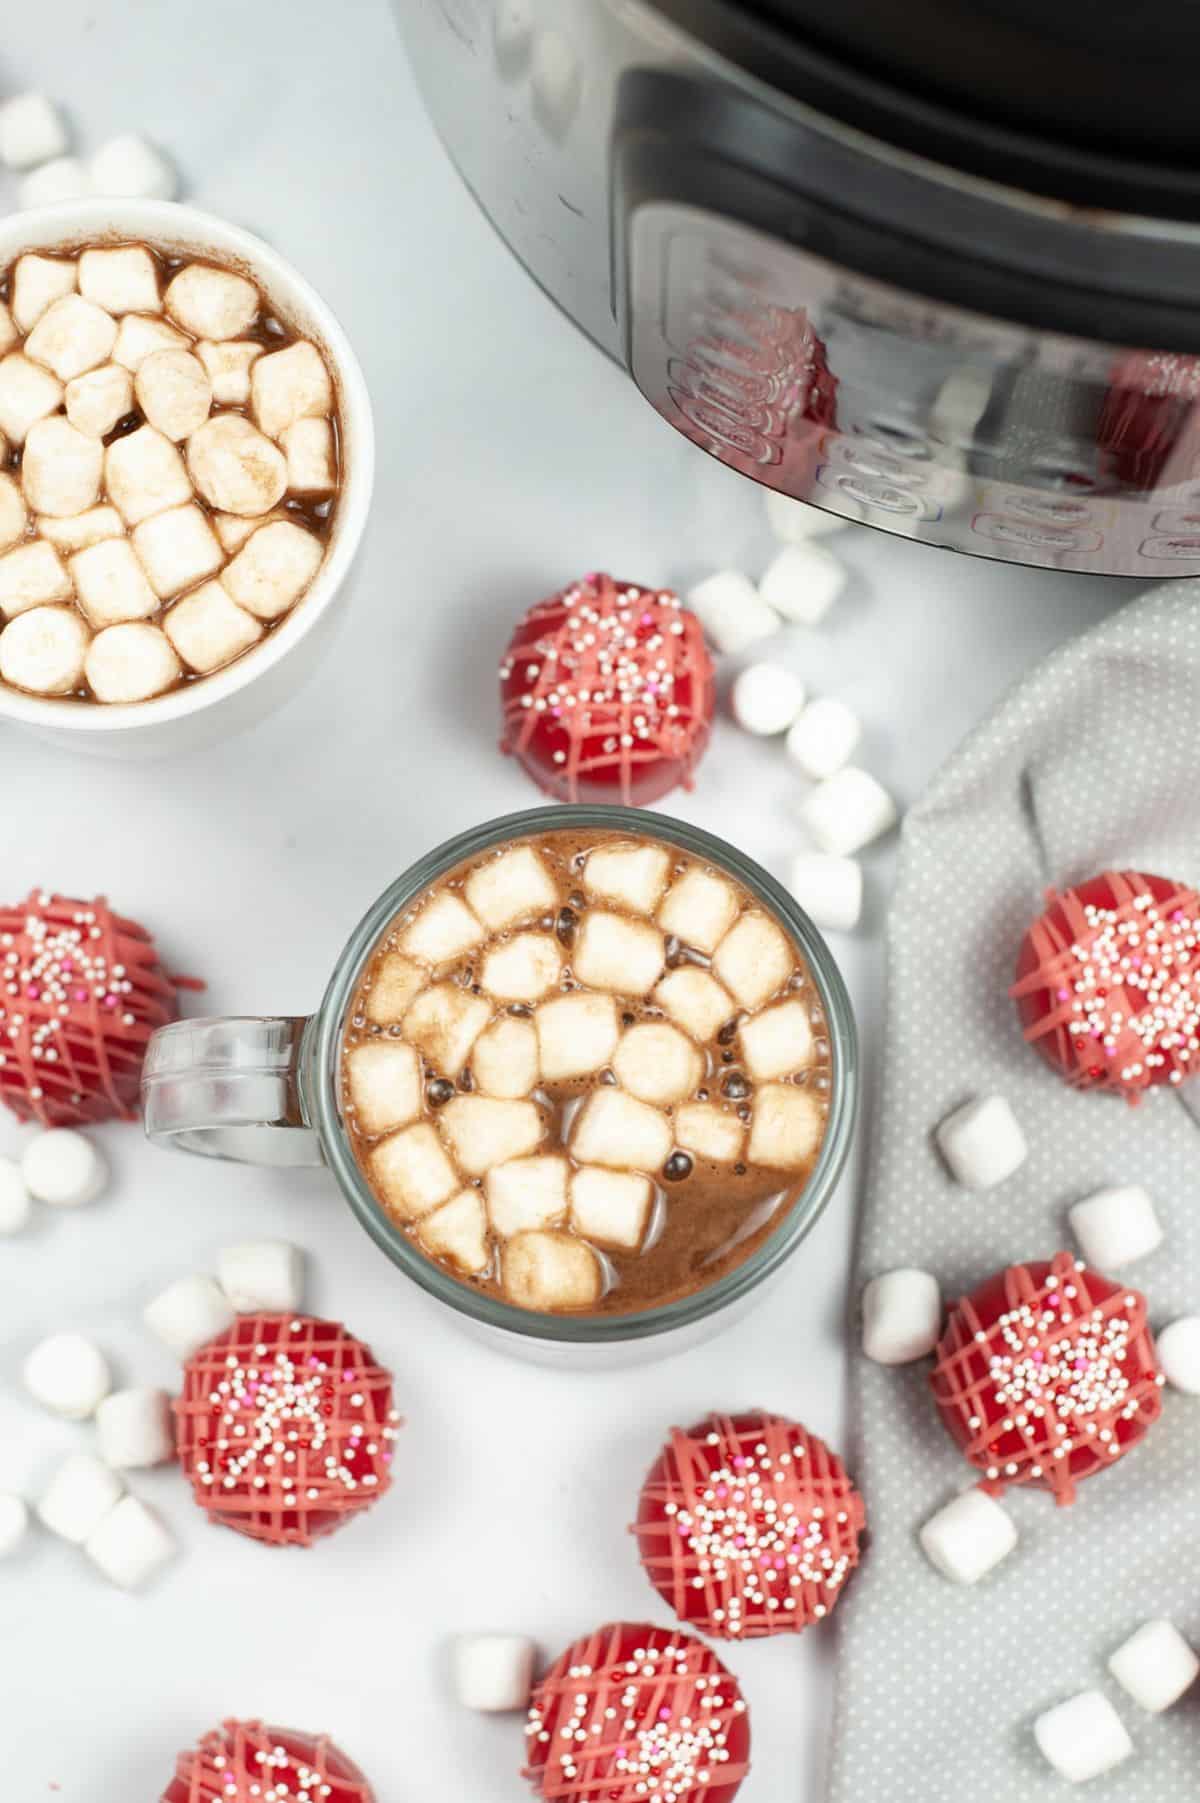 hot chocolate in a mug next to Valentine cocoa bombs and marshmallows.